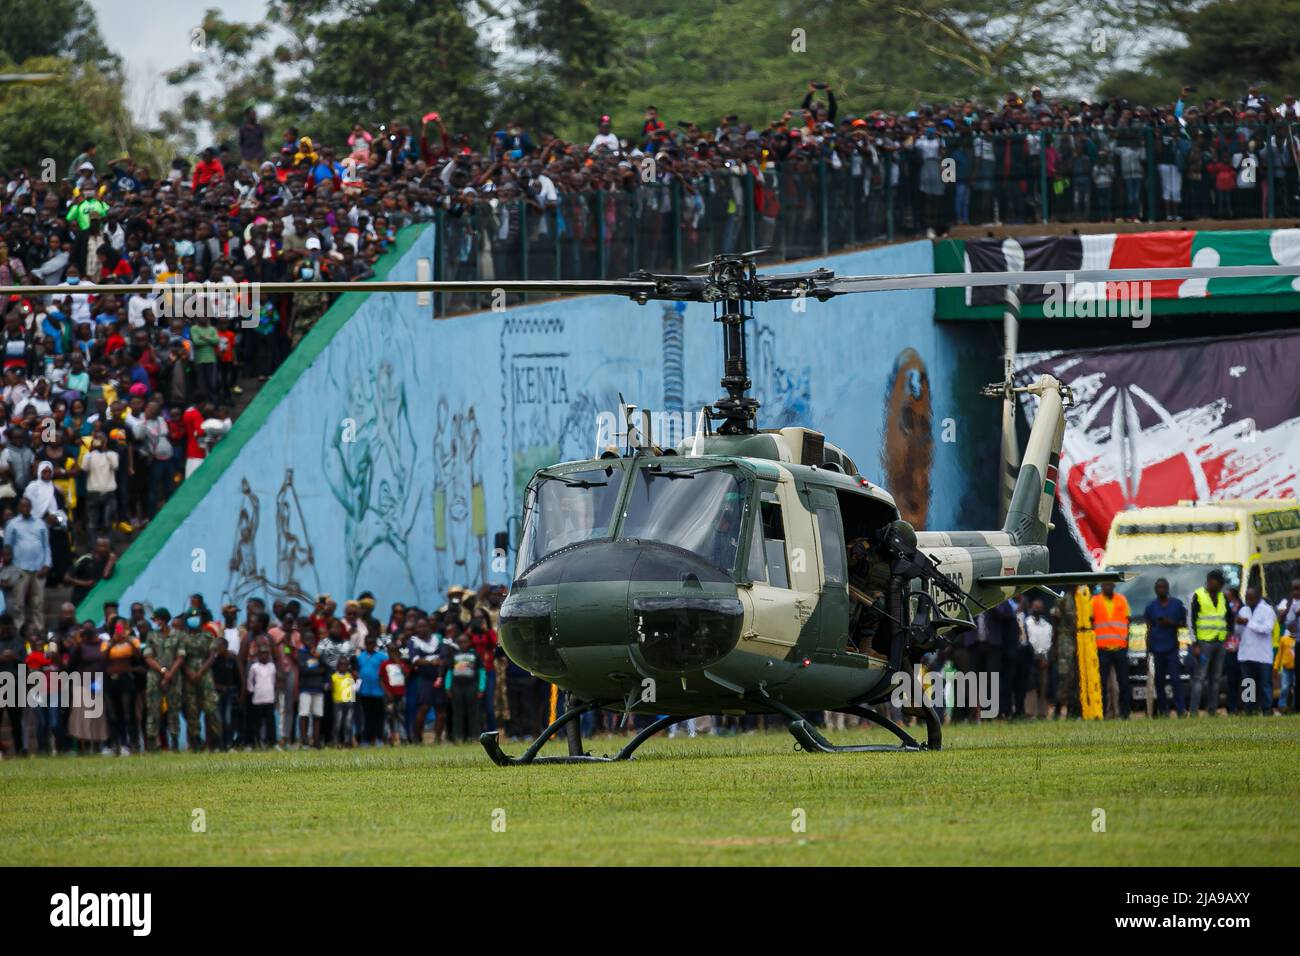 Nairobi, Kenya. 28th May, 2022. Kenyans turn up in large numbers at the Kenya Defence Forces Air Show at the Uhuru Gardens National Monument and Museum. The free Air Show was a forerunner of commissioning the Uhuru Gardens National Monument and Museum. It was led by Kenya Air Force and included the Kenya wildlife services and civilian aerobatic and sky diving teams. The aim was to entertain and educate the public. Credit: SOPA Images Limited/Alamy Live News Stock Photo